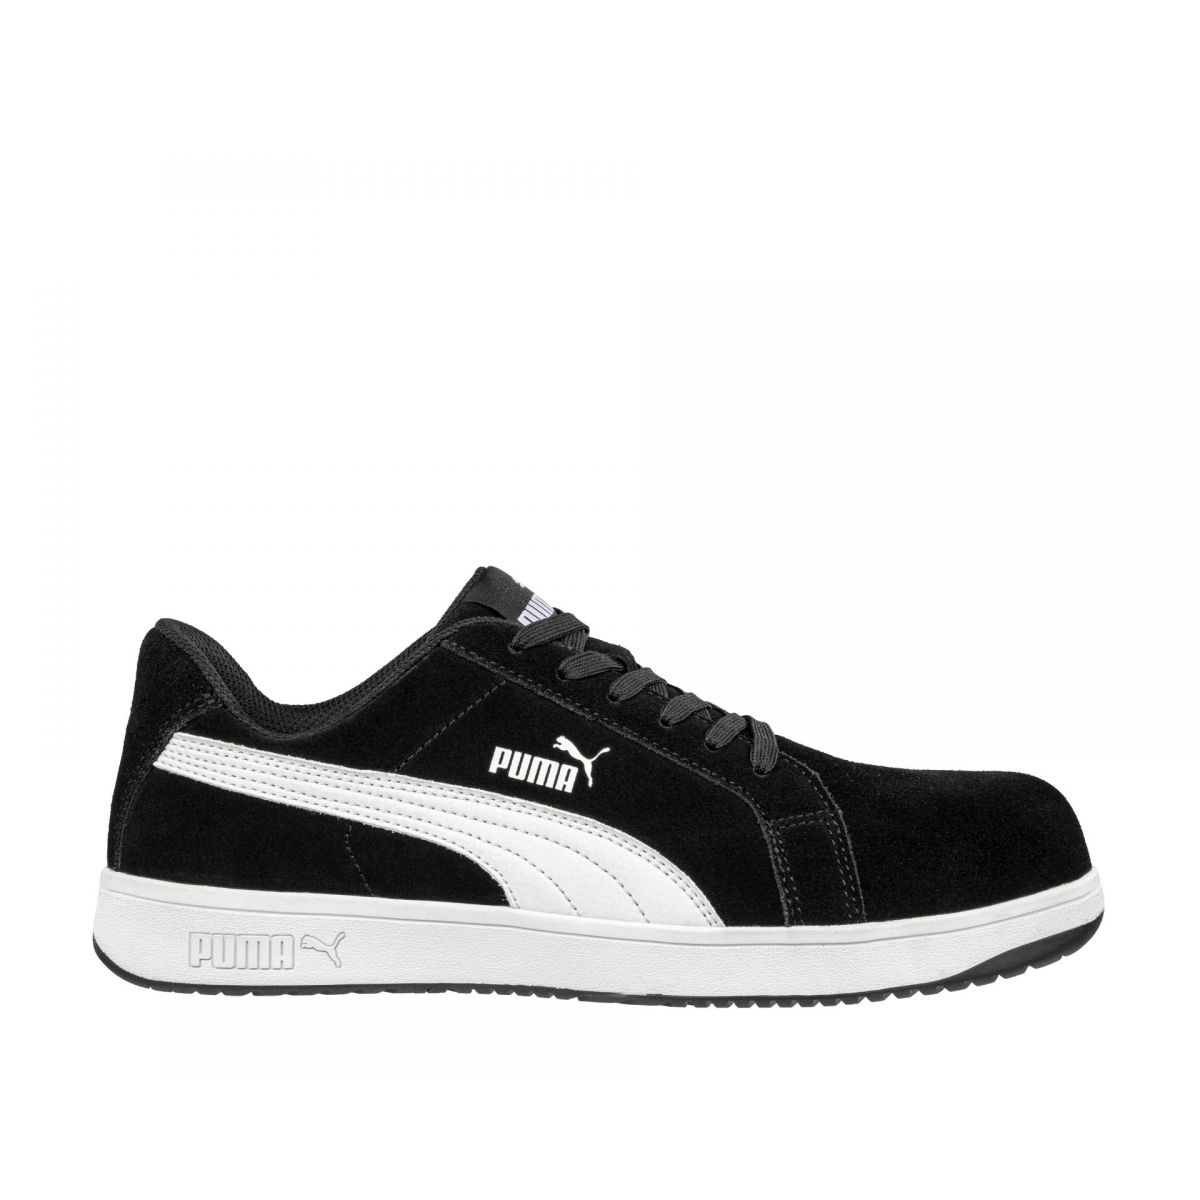 PUMA Safety Men's Iconic Low Composite Toe EH Work Shoes Black Suede - 640015 ONE SIZE BLACK - BLACK, 8